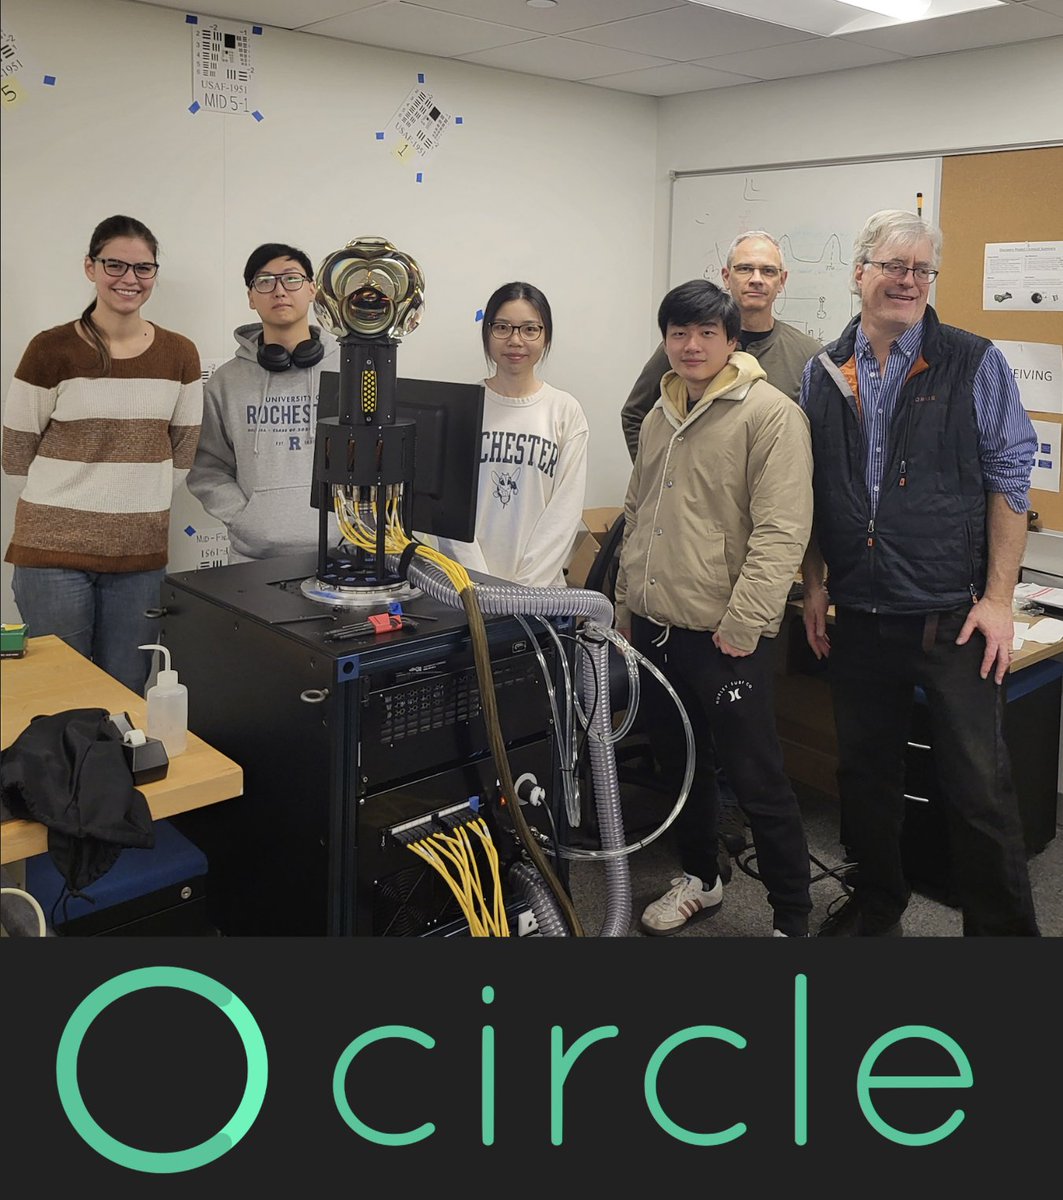 .@CircleOptics Research Officer Andy Kurtz is working with four @uofr students. This is the very first public picture taken of Hydra II. We believe wide field of view imaging is the future of camera systems. #KnowHow #Synergy #Innovation #TeamCircle circleoptics.com